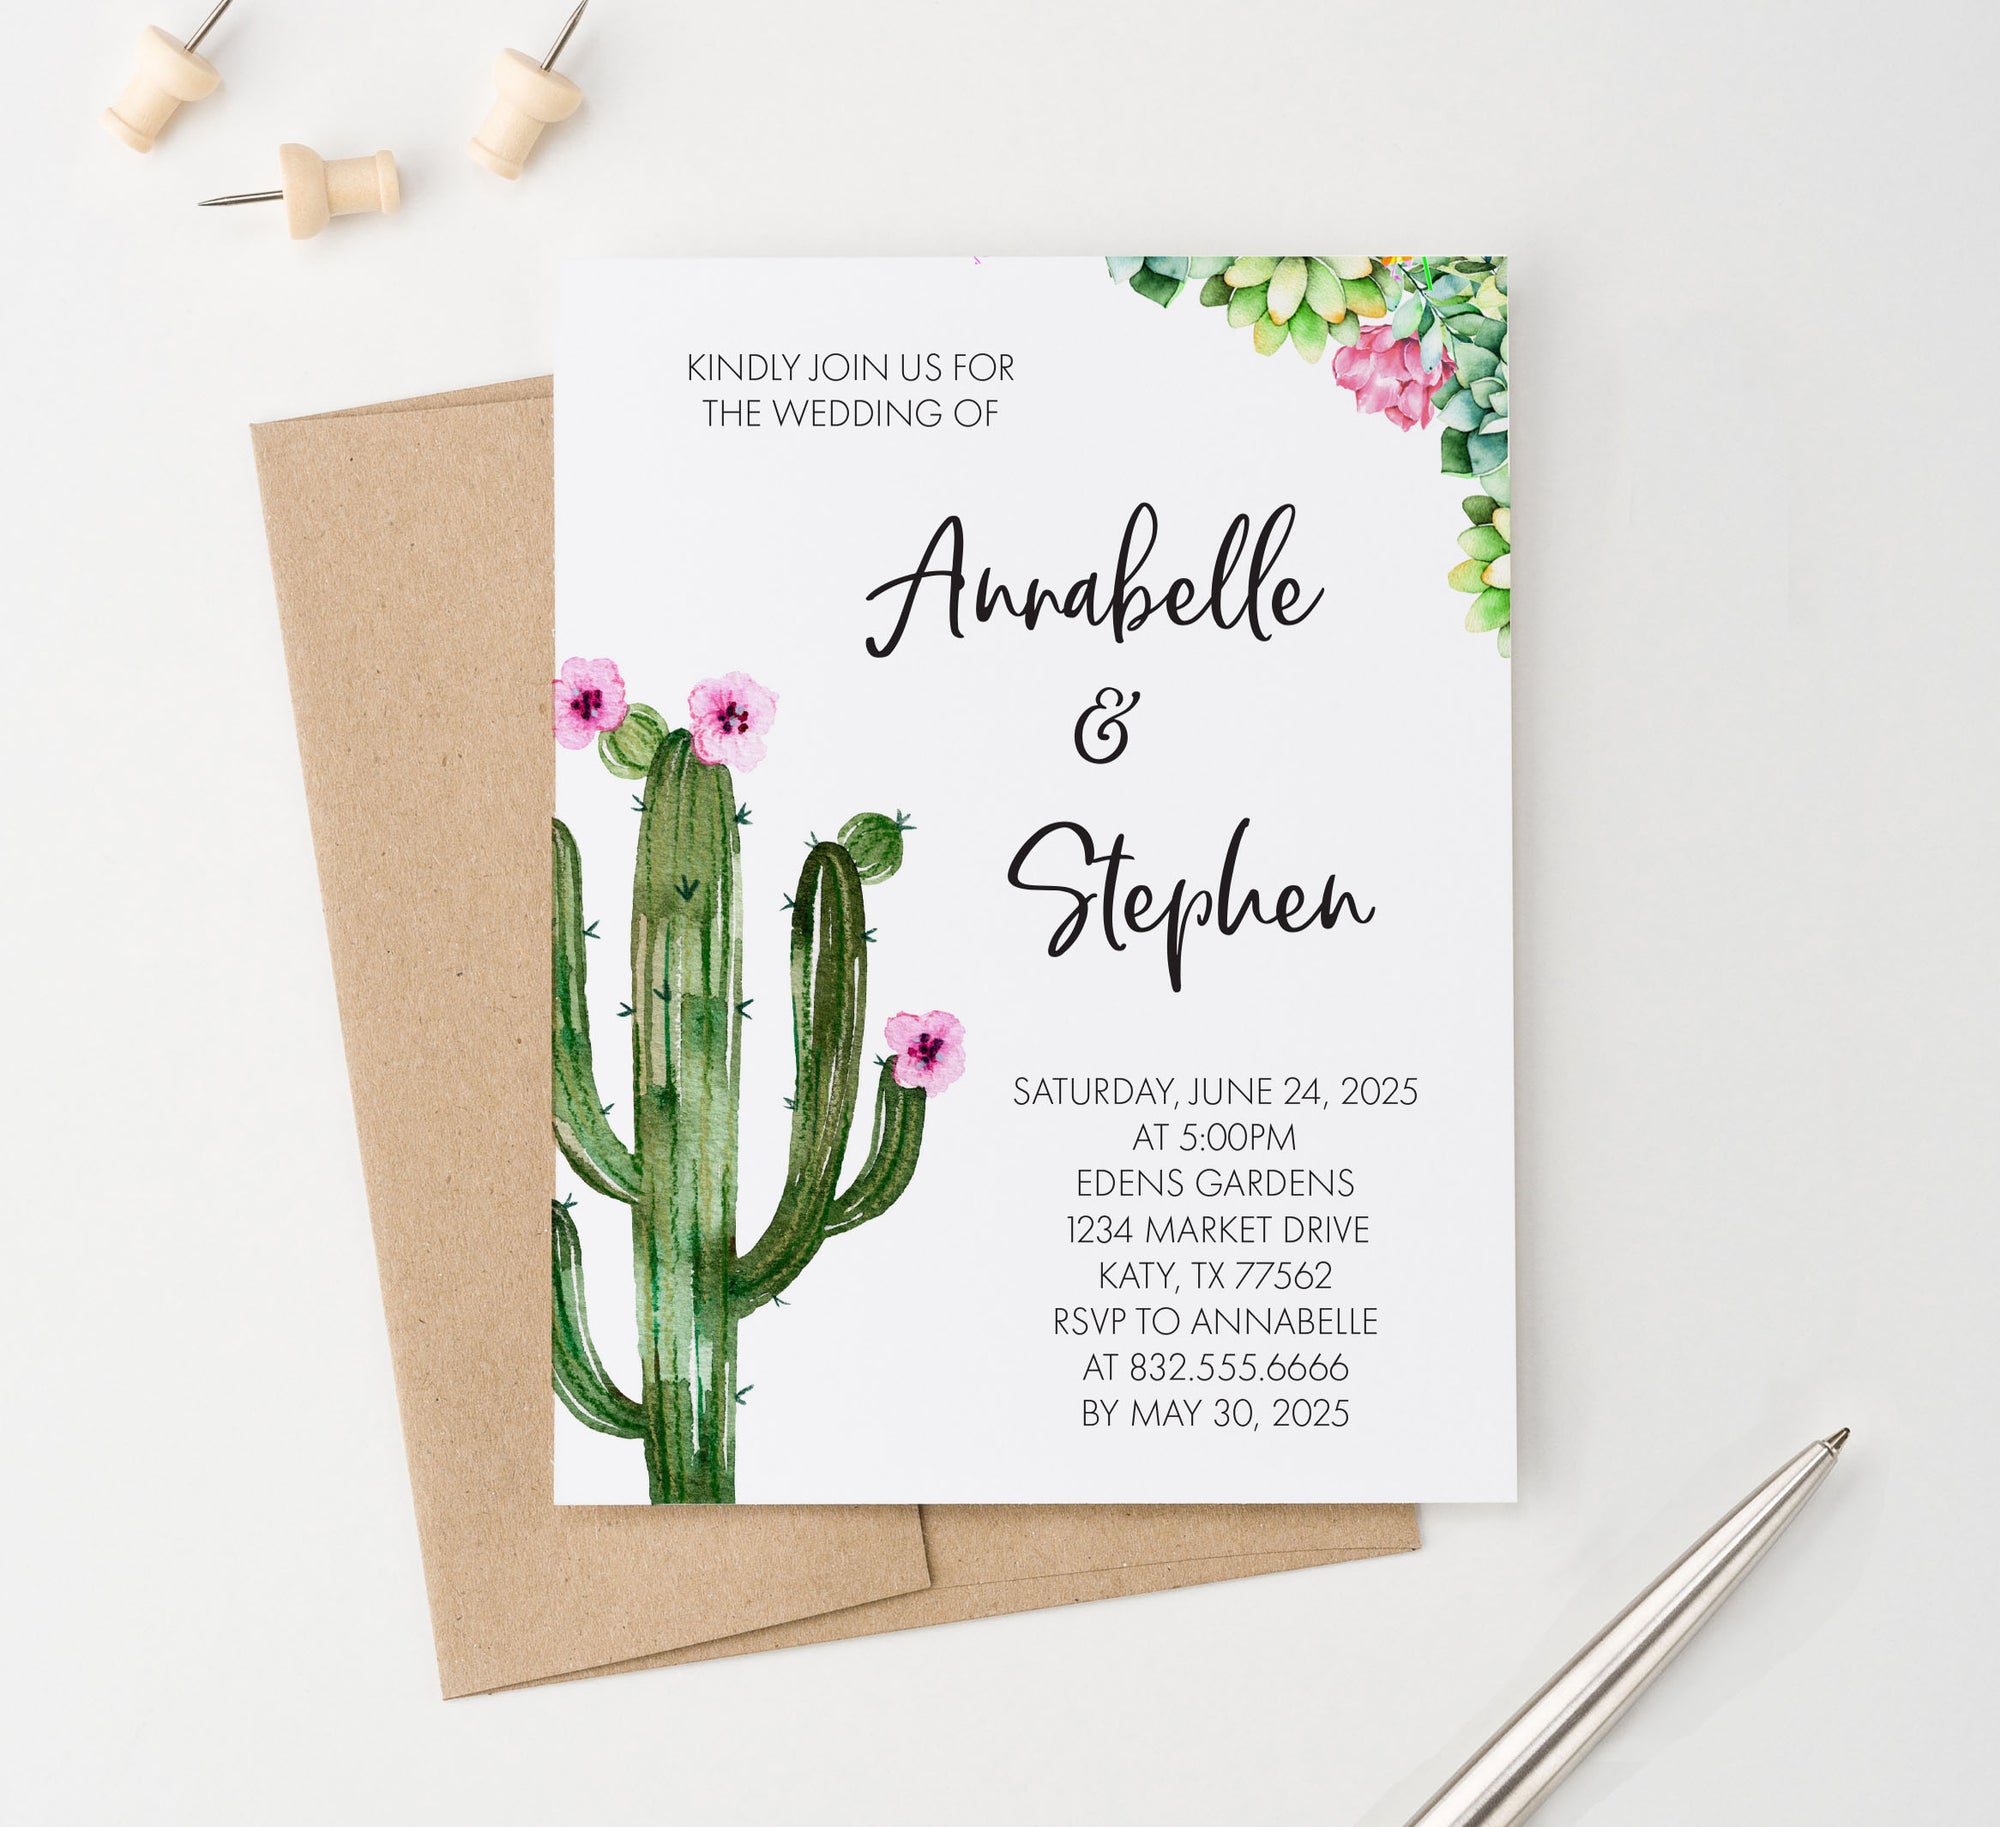 WI038 Cactus Watercolor Wedding Invite Personalized succulents succulent water color elegant modern floral invitations marriage